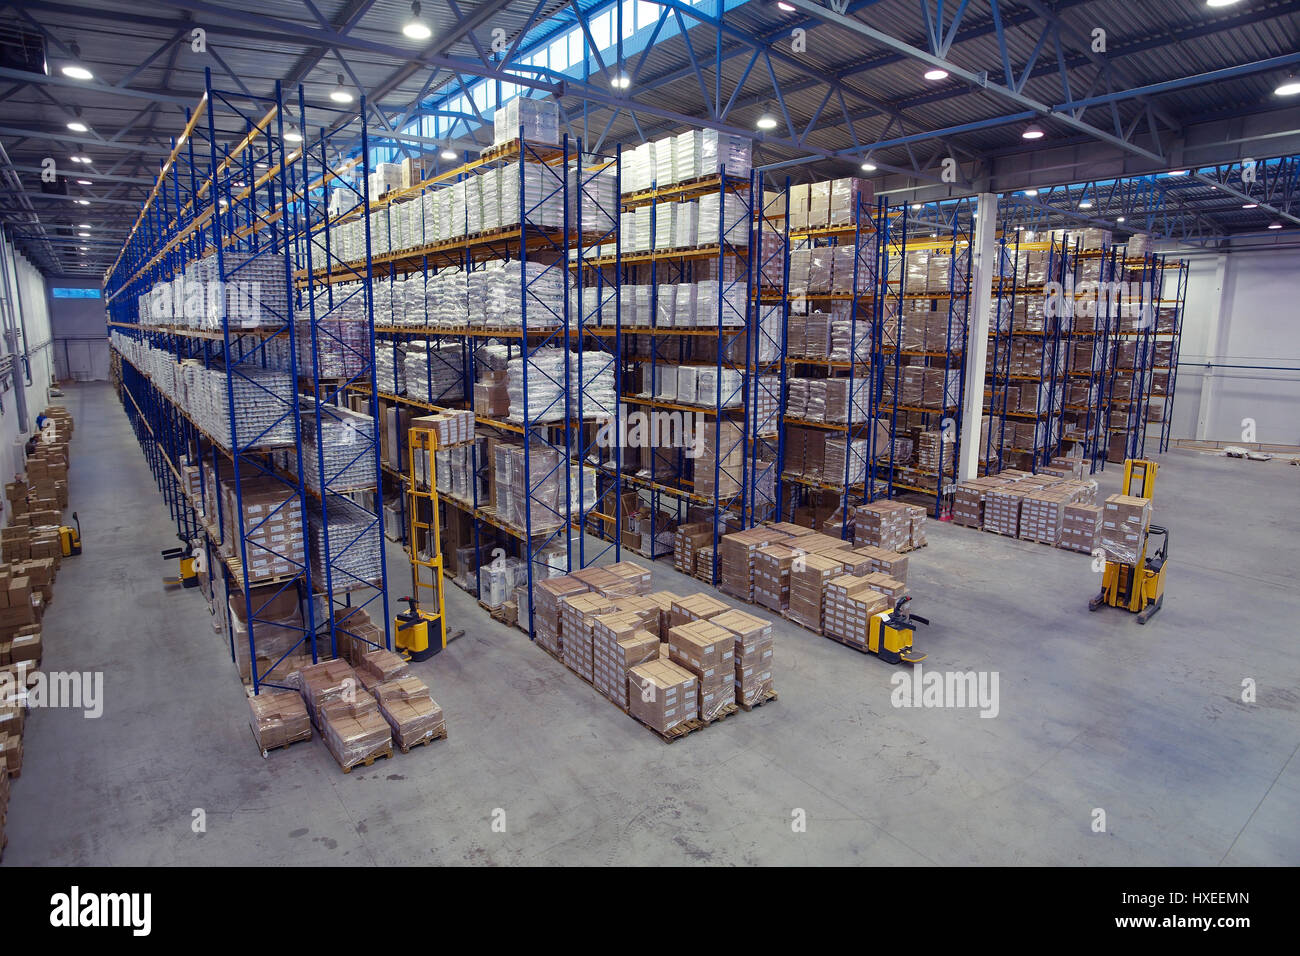 St. Petersburg, Russia - November 21, 2008: Top view of the interior area the warehouse pallet racking storage of goods. Stock Photo